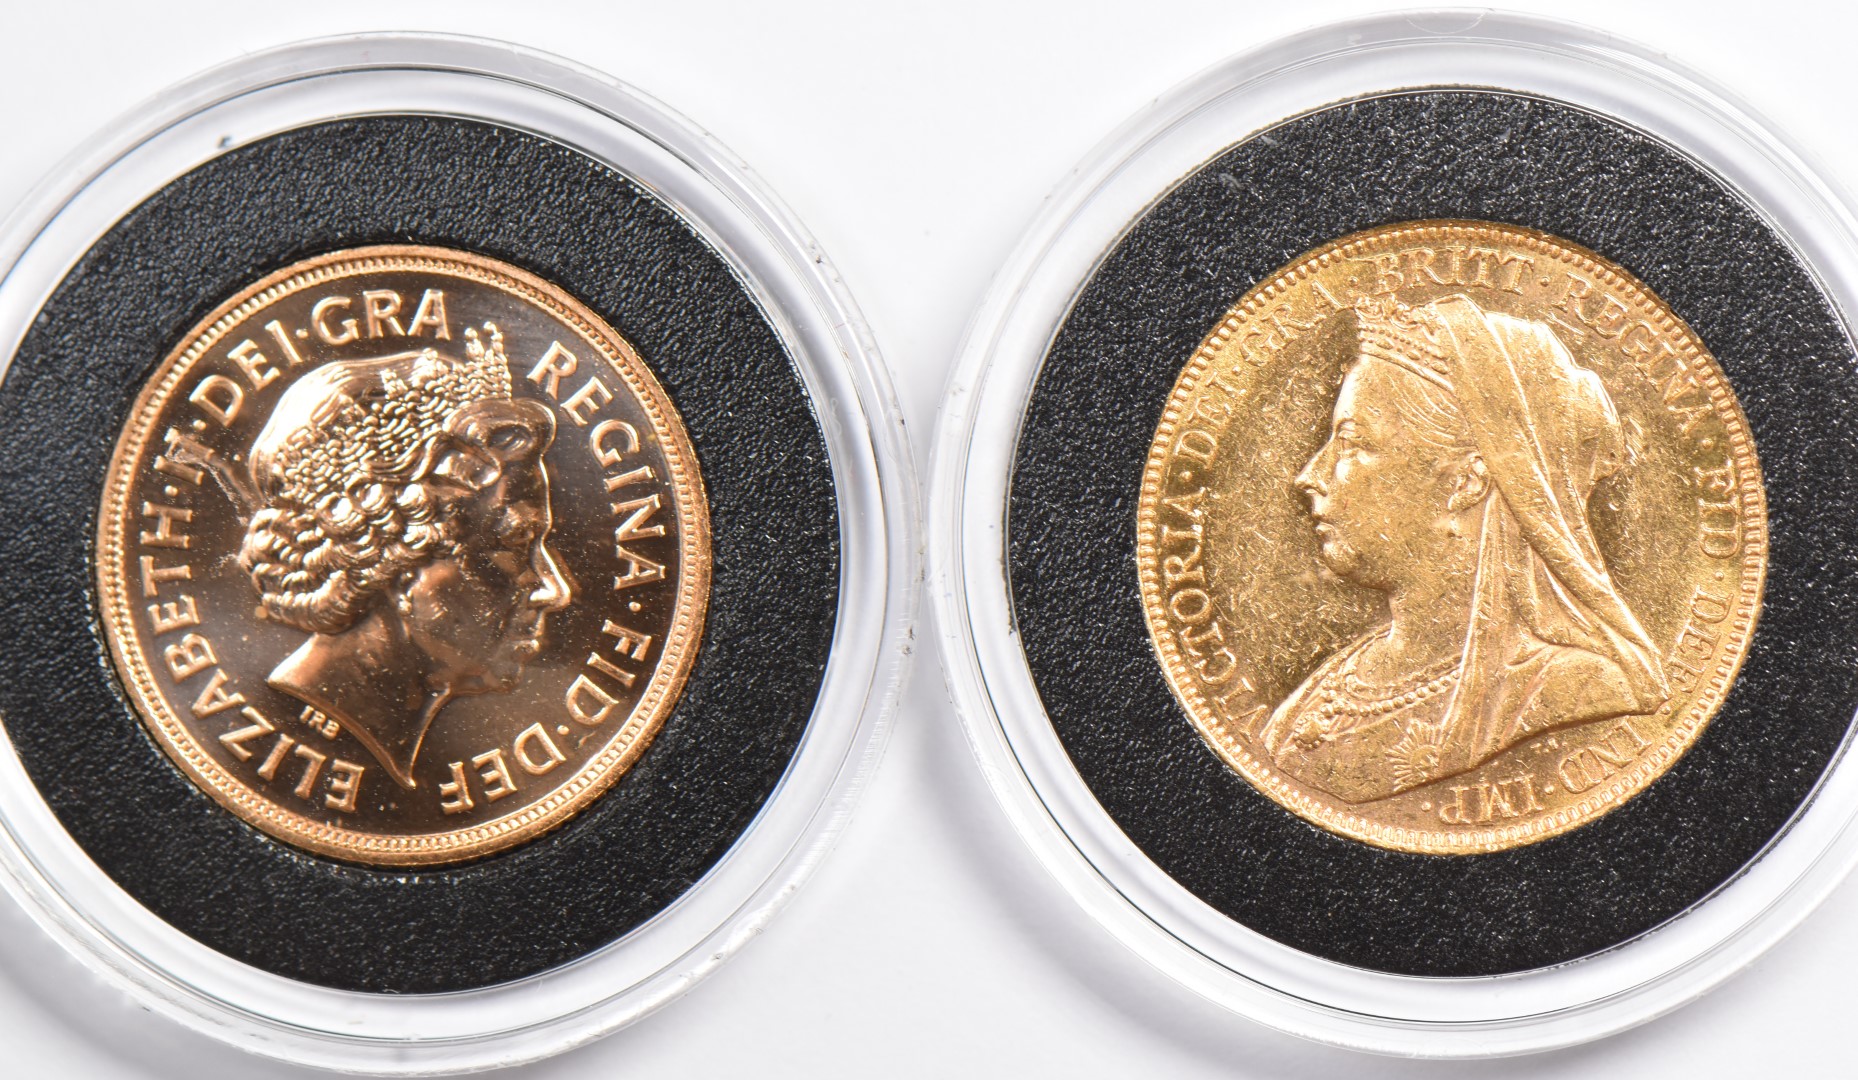 Hattons of London 1897 and 2012 two coin gold sovereign set commemorating the Diamond Jubilees, - Image 4 of 4